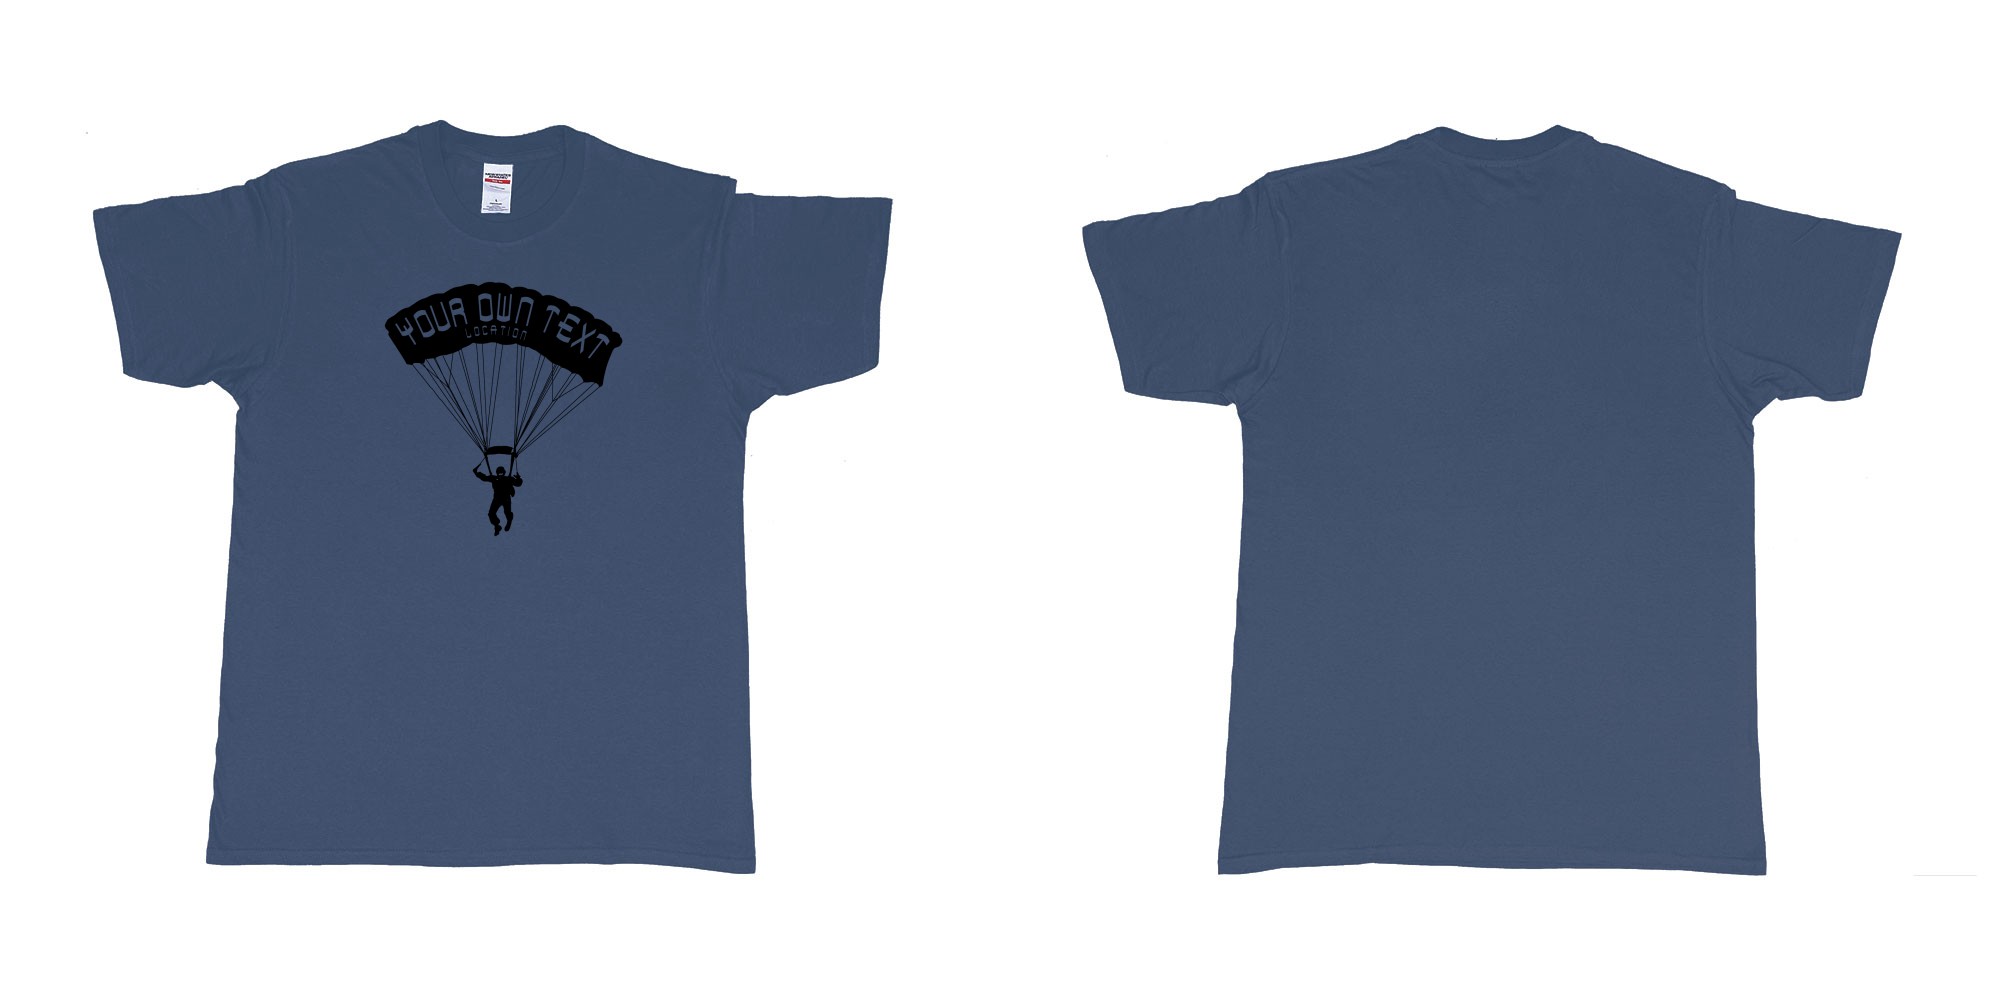 Custom tshirt design skydiver club custom print in fabric color navy choice your own text made in Bali by The Pirate Way